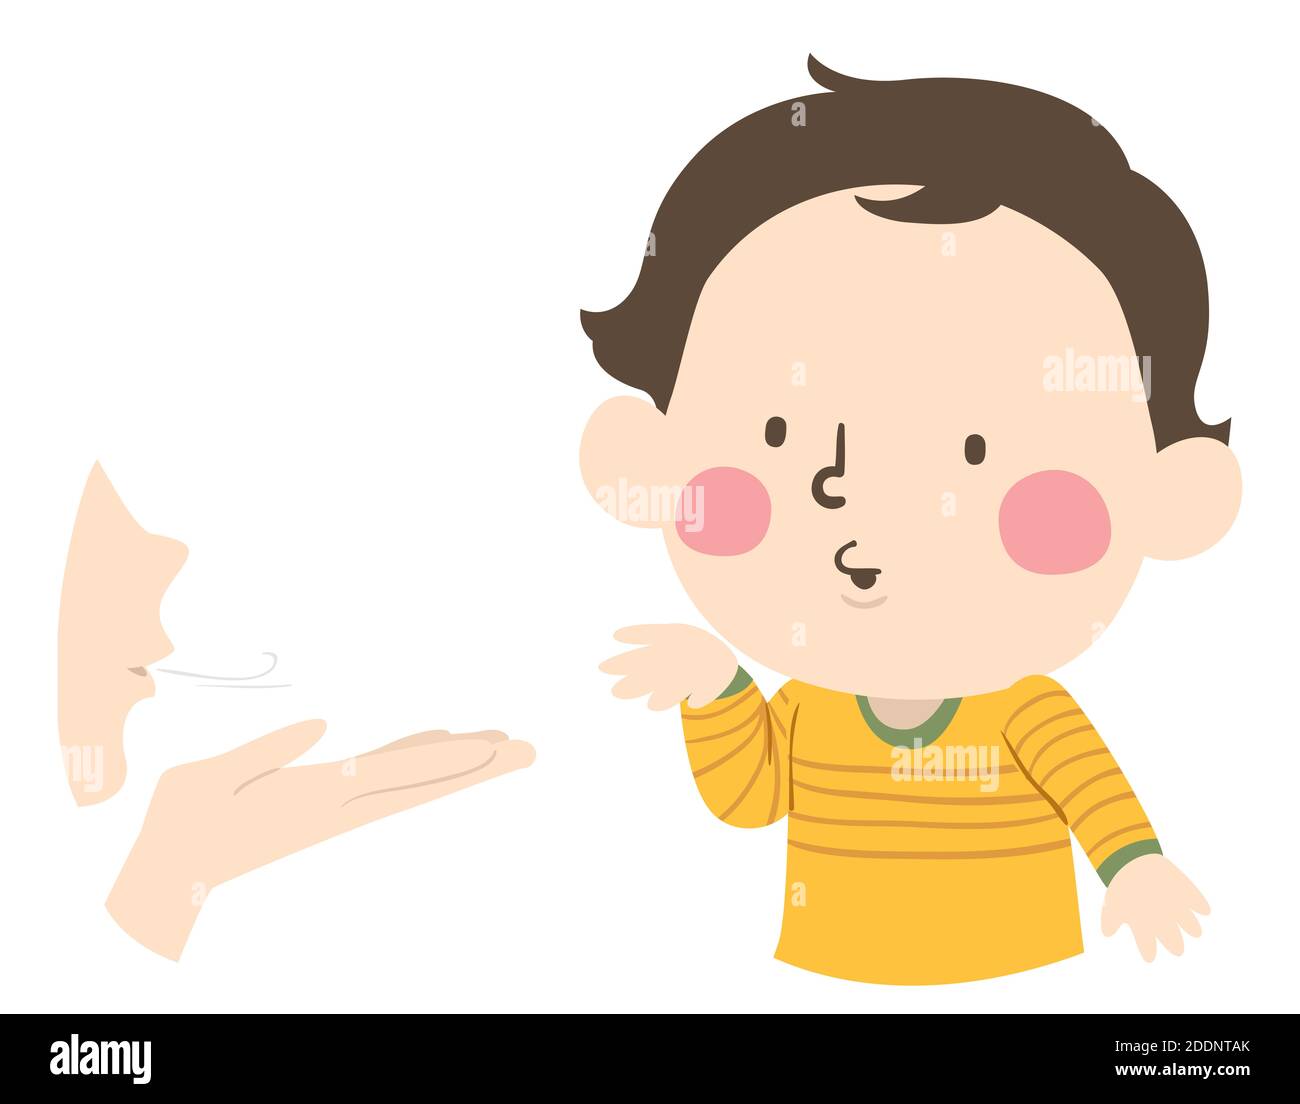 Illustration of a Kid Boy Toddler Blowing Flying Kiss Gesture with Mother Doing the Same Stock Photo